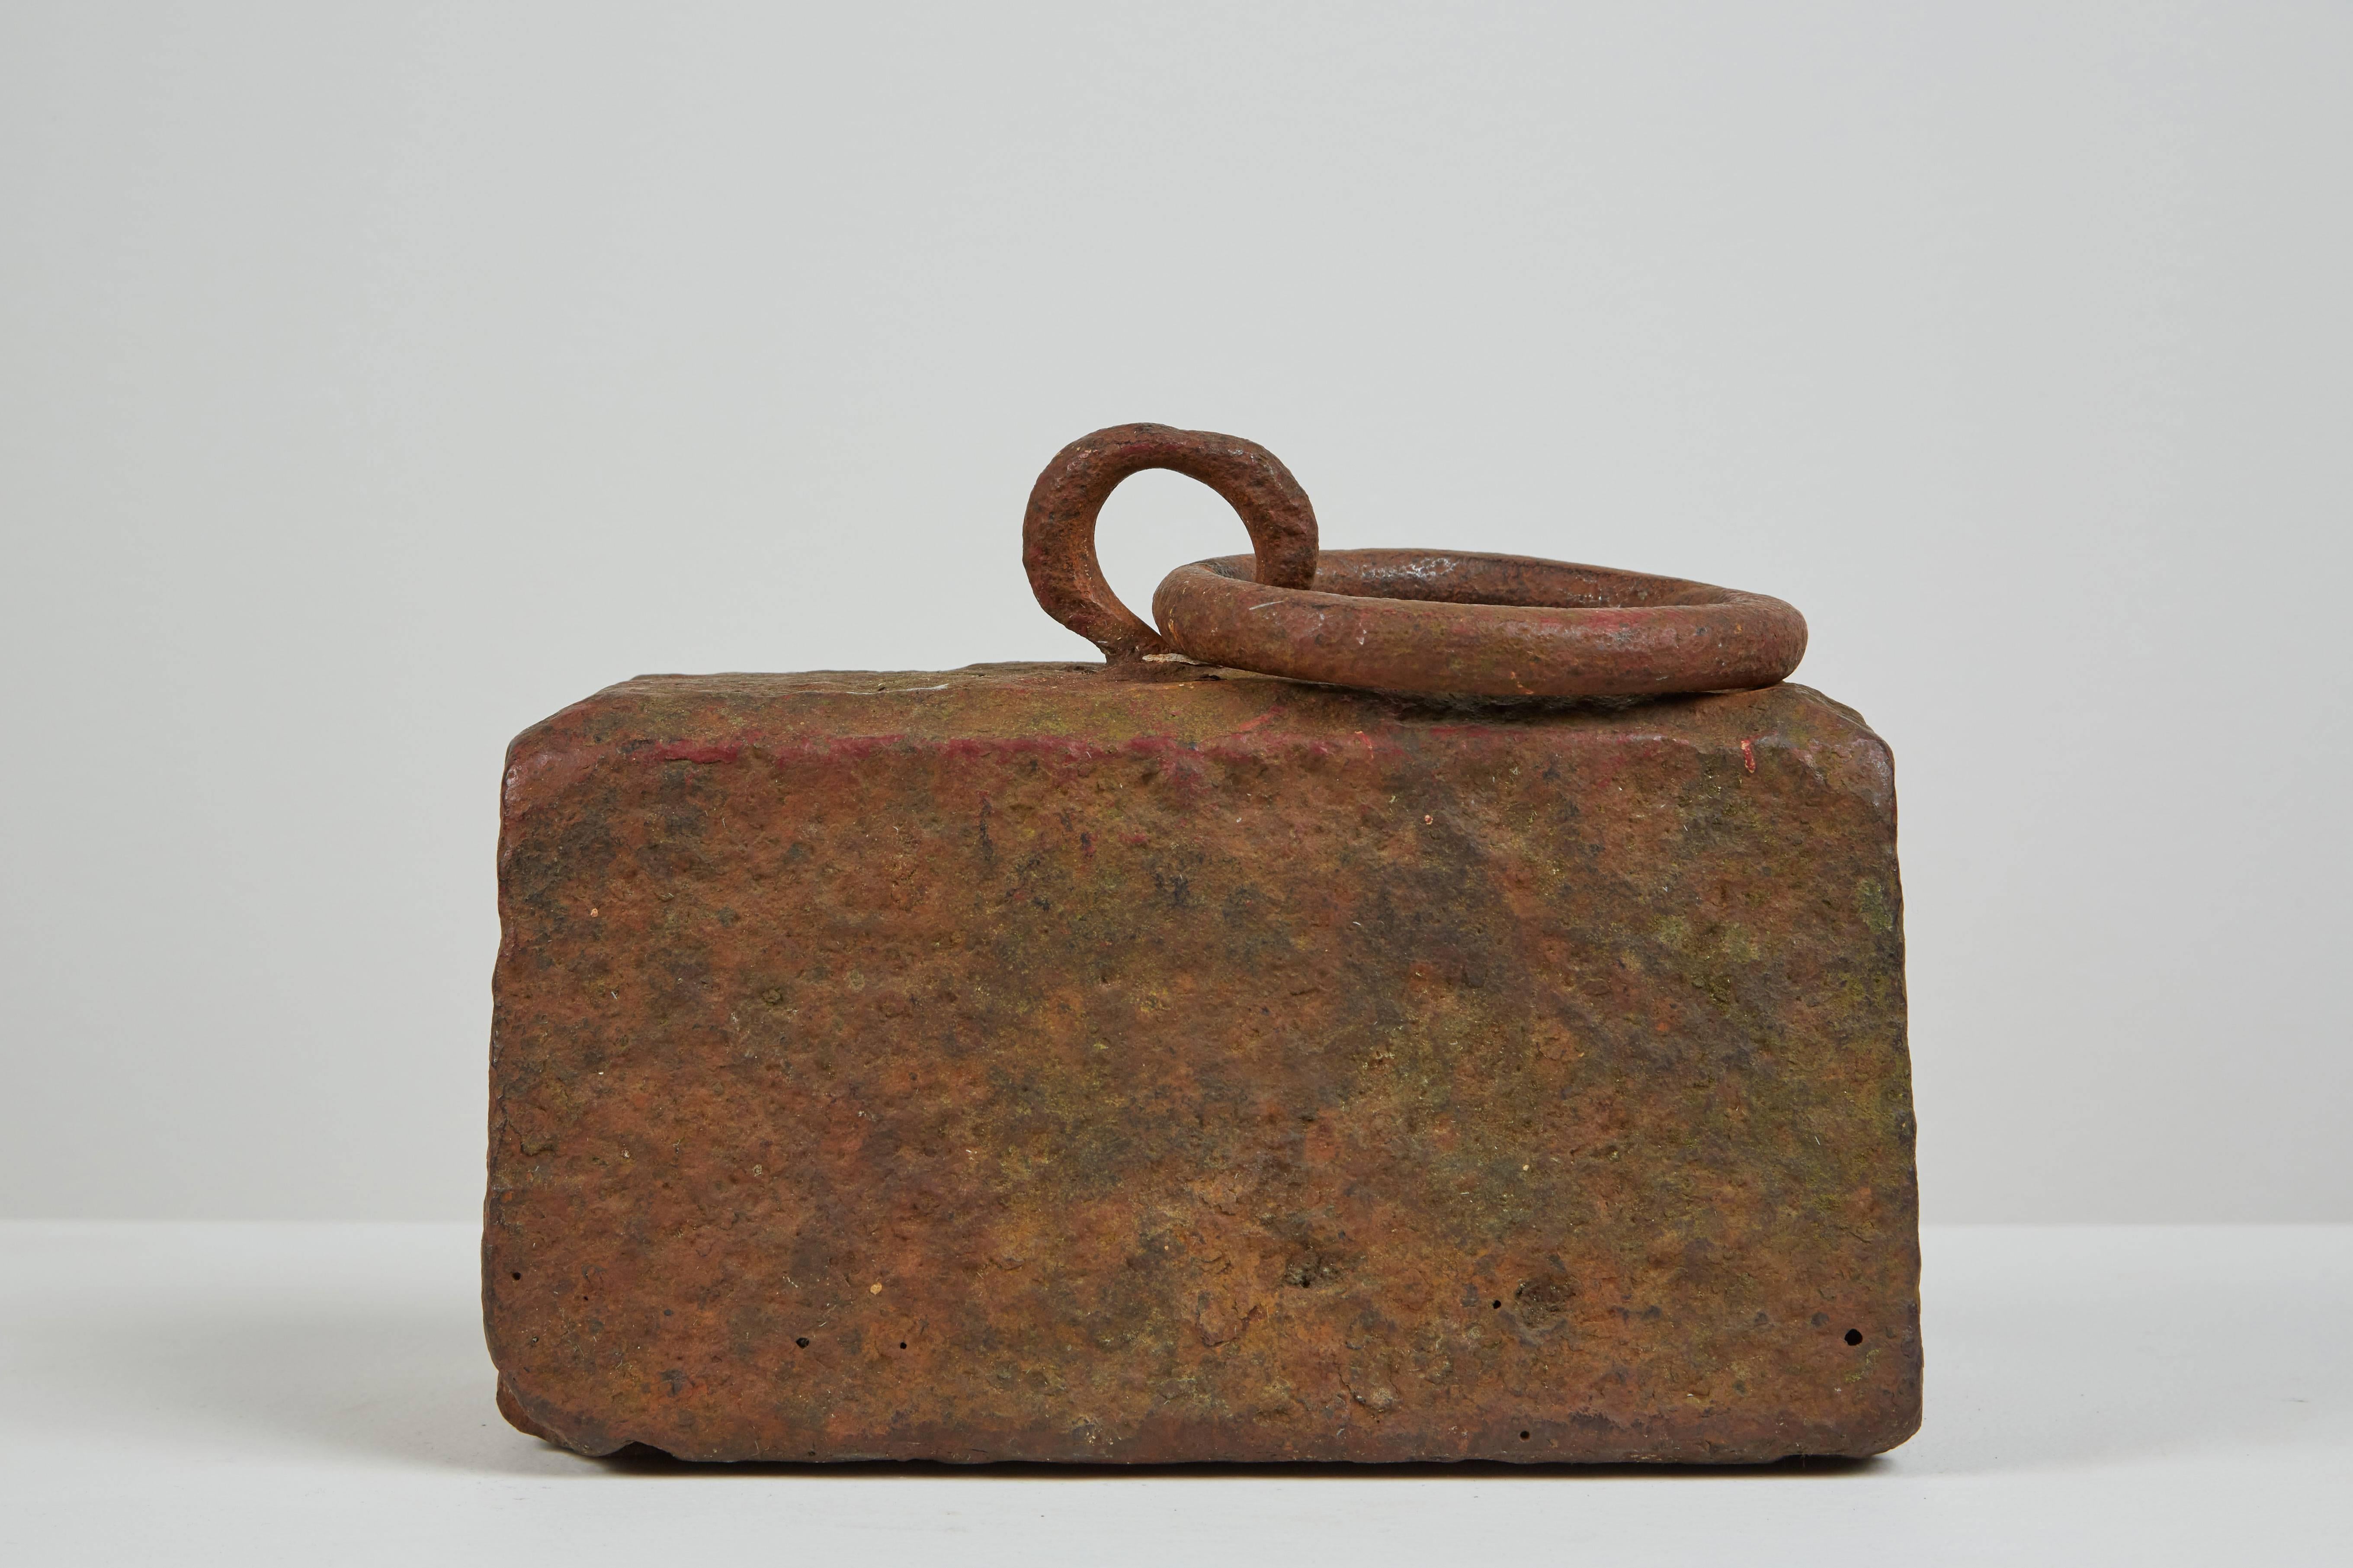 Hand-wrought iron horse tether with heavy patina. Can be used as a doorstop or sculpture. Made in USA, circa 1850s.